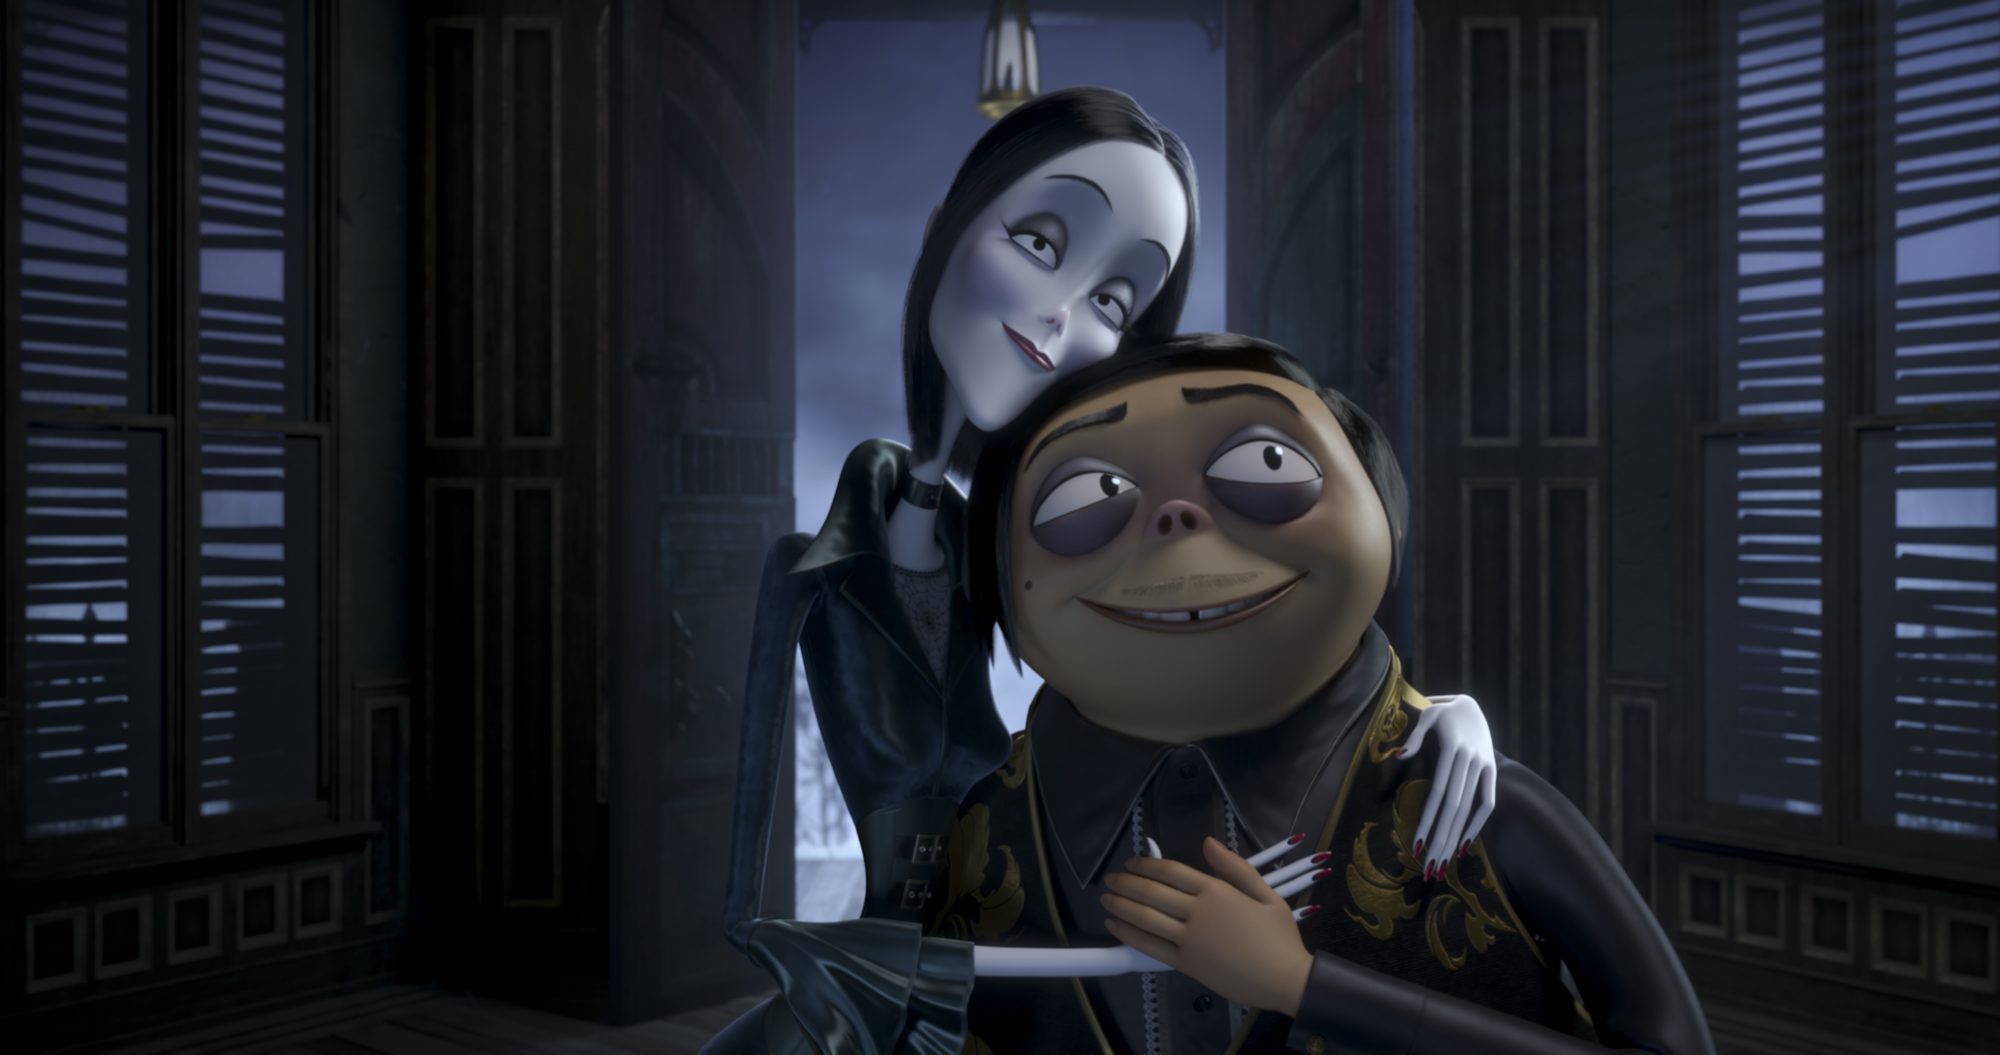 [News] Meet THE ADDAMS FAMILY in First Look Trailer